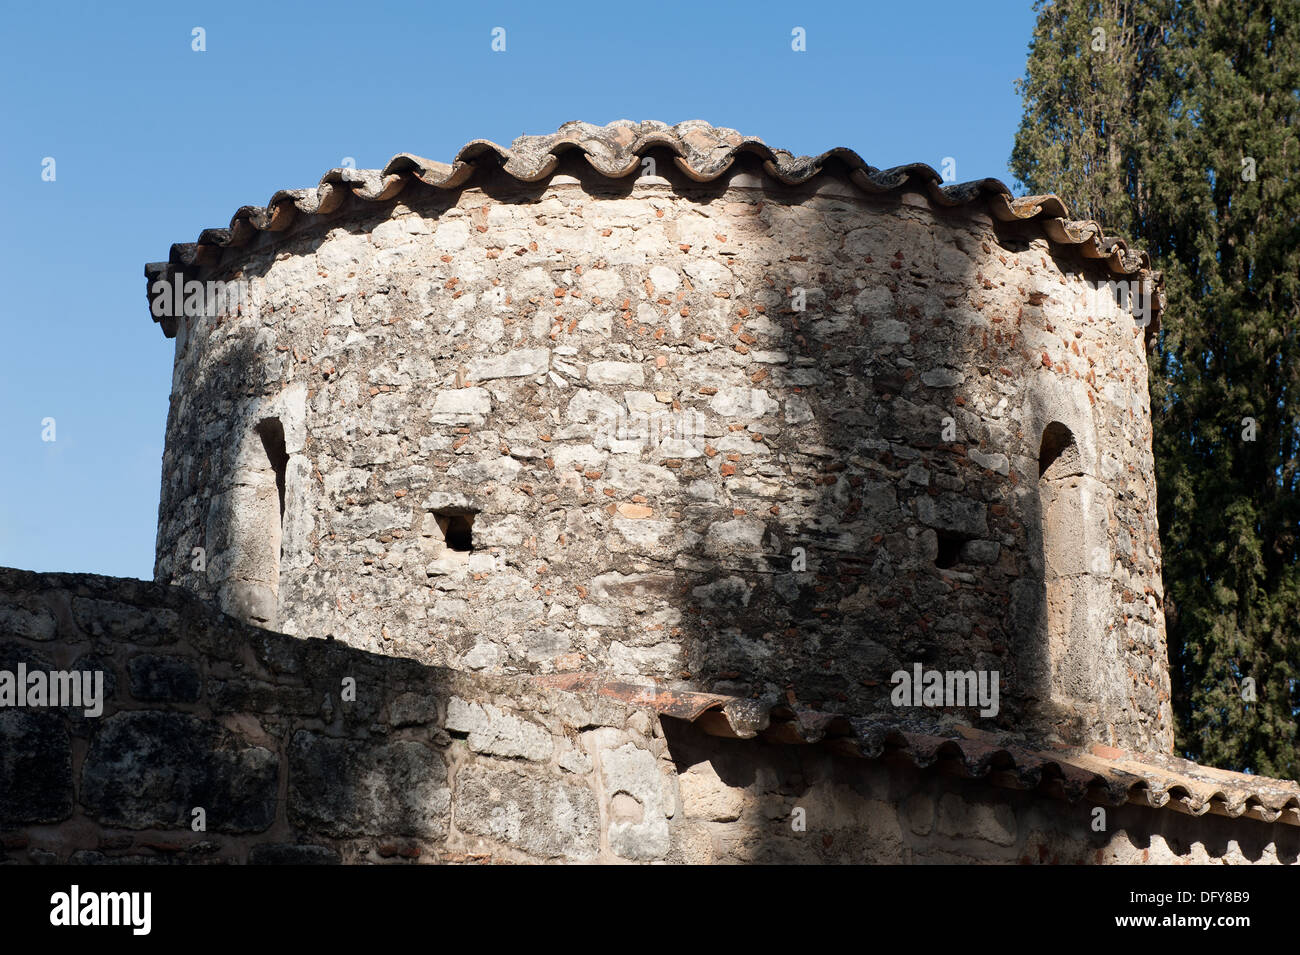 Page 5 - Orthodox Church Crete High Resolution Stock Photography and Images  - Alamy